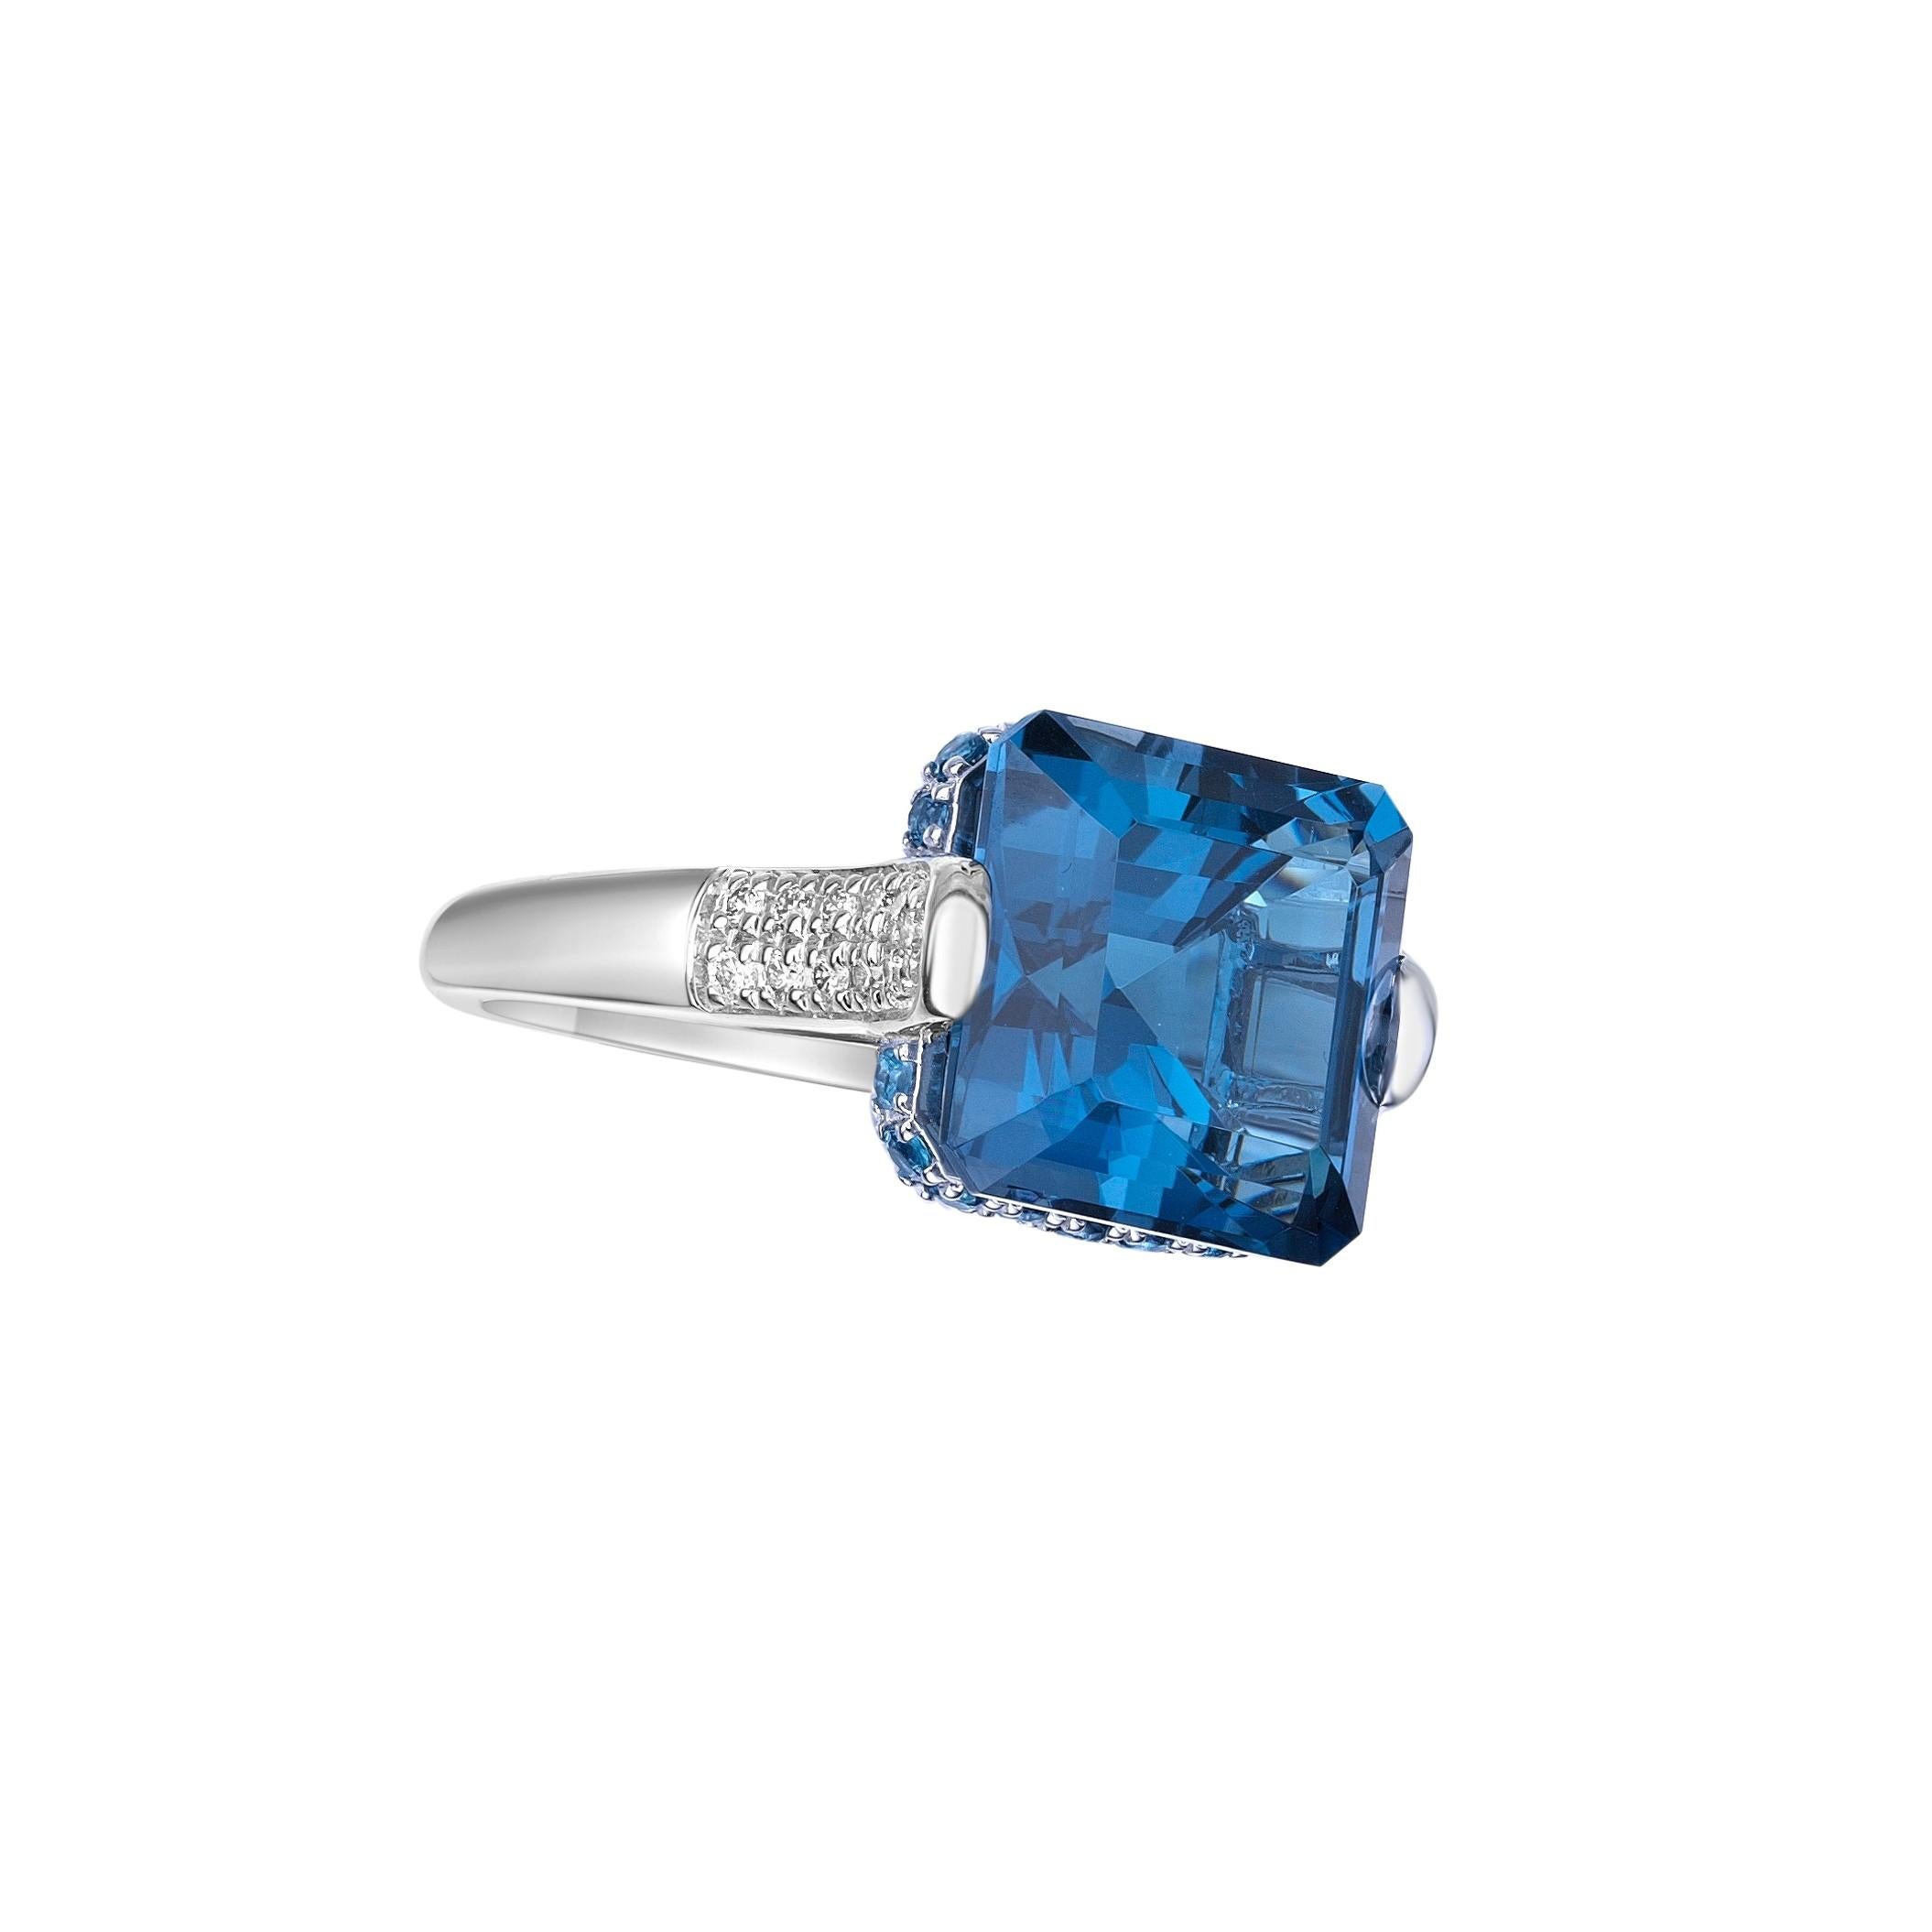 Octagon Cut 10.59 Carat London Blue Topaz Fancy Ring in 18KWG with White Diamond. For Sale